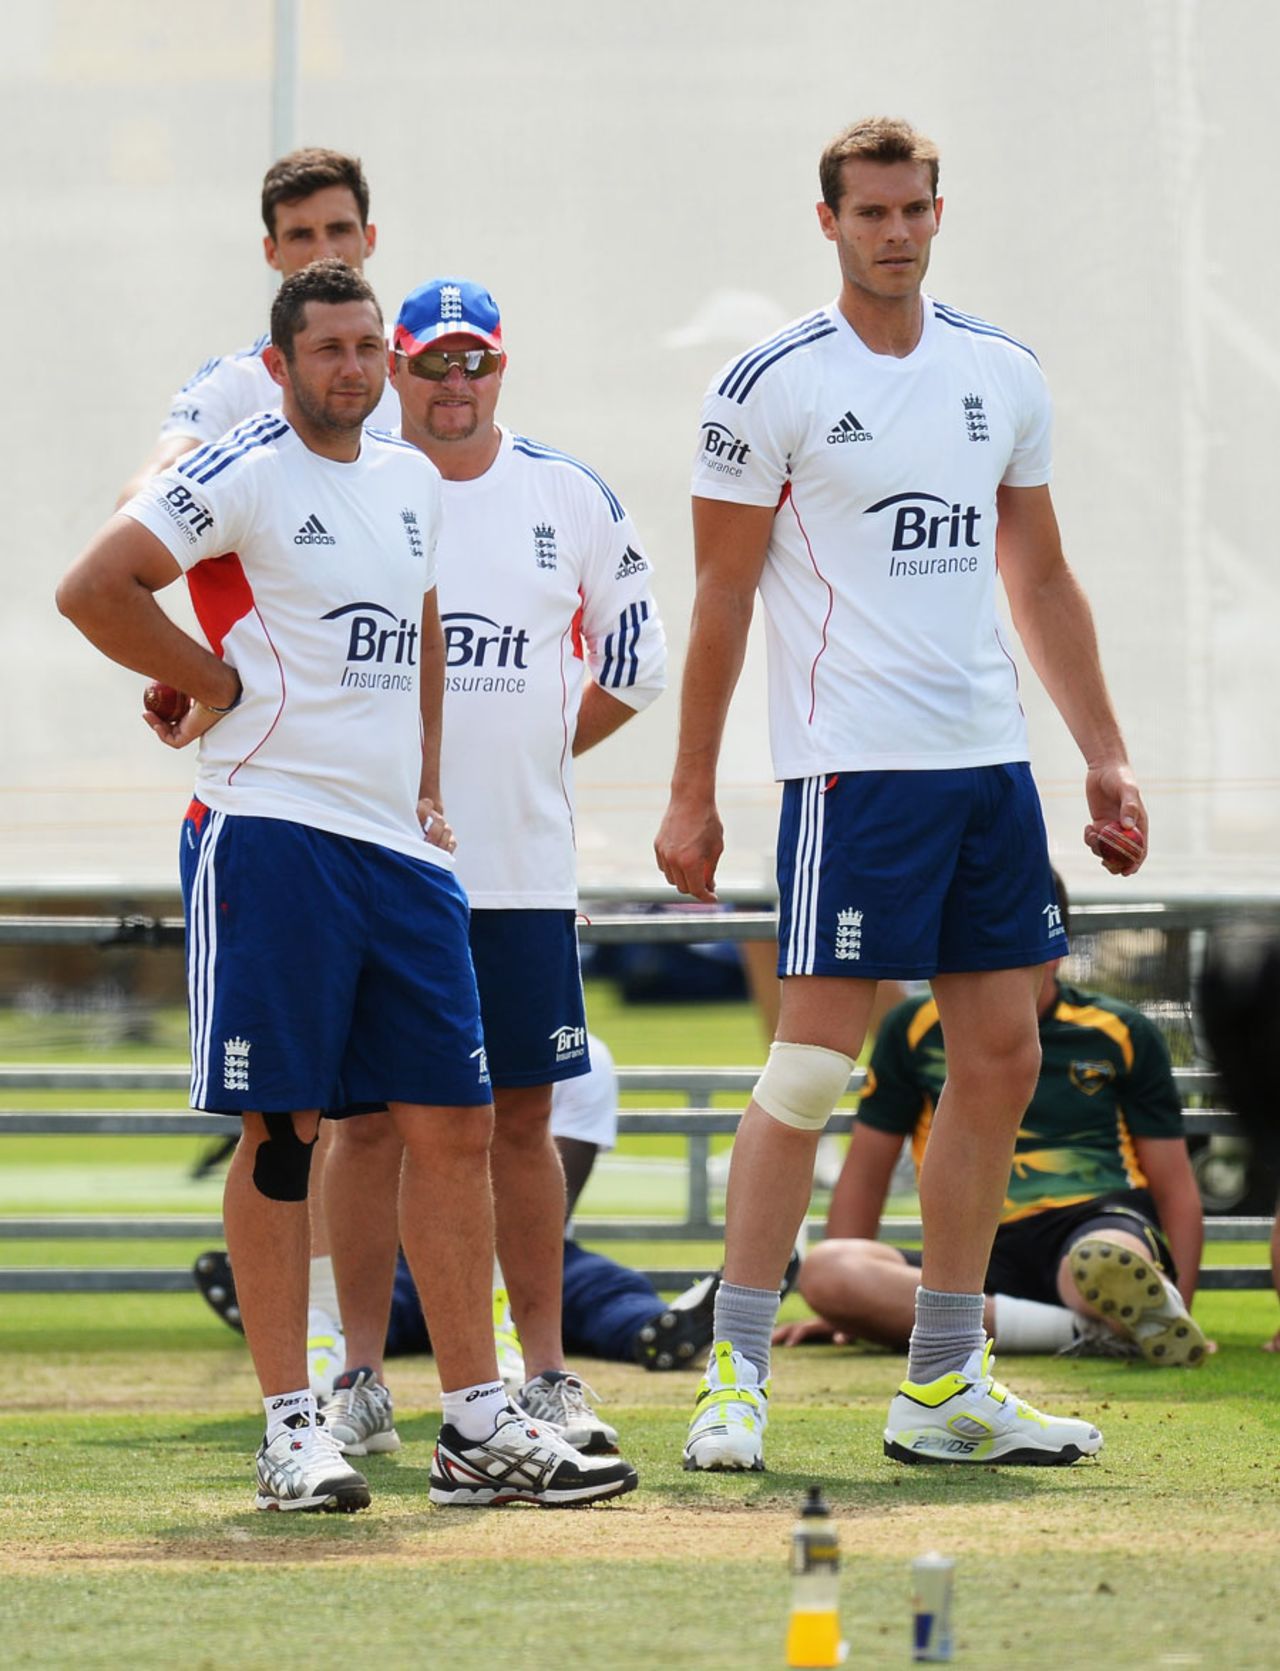 Chris Tremlett joined practice with the England Test squad, Lord's, July 16, 2013